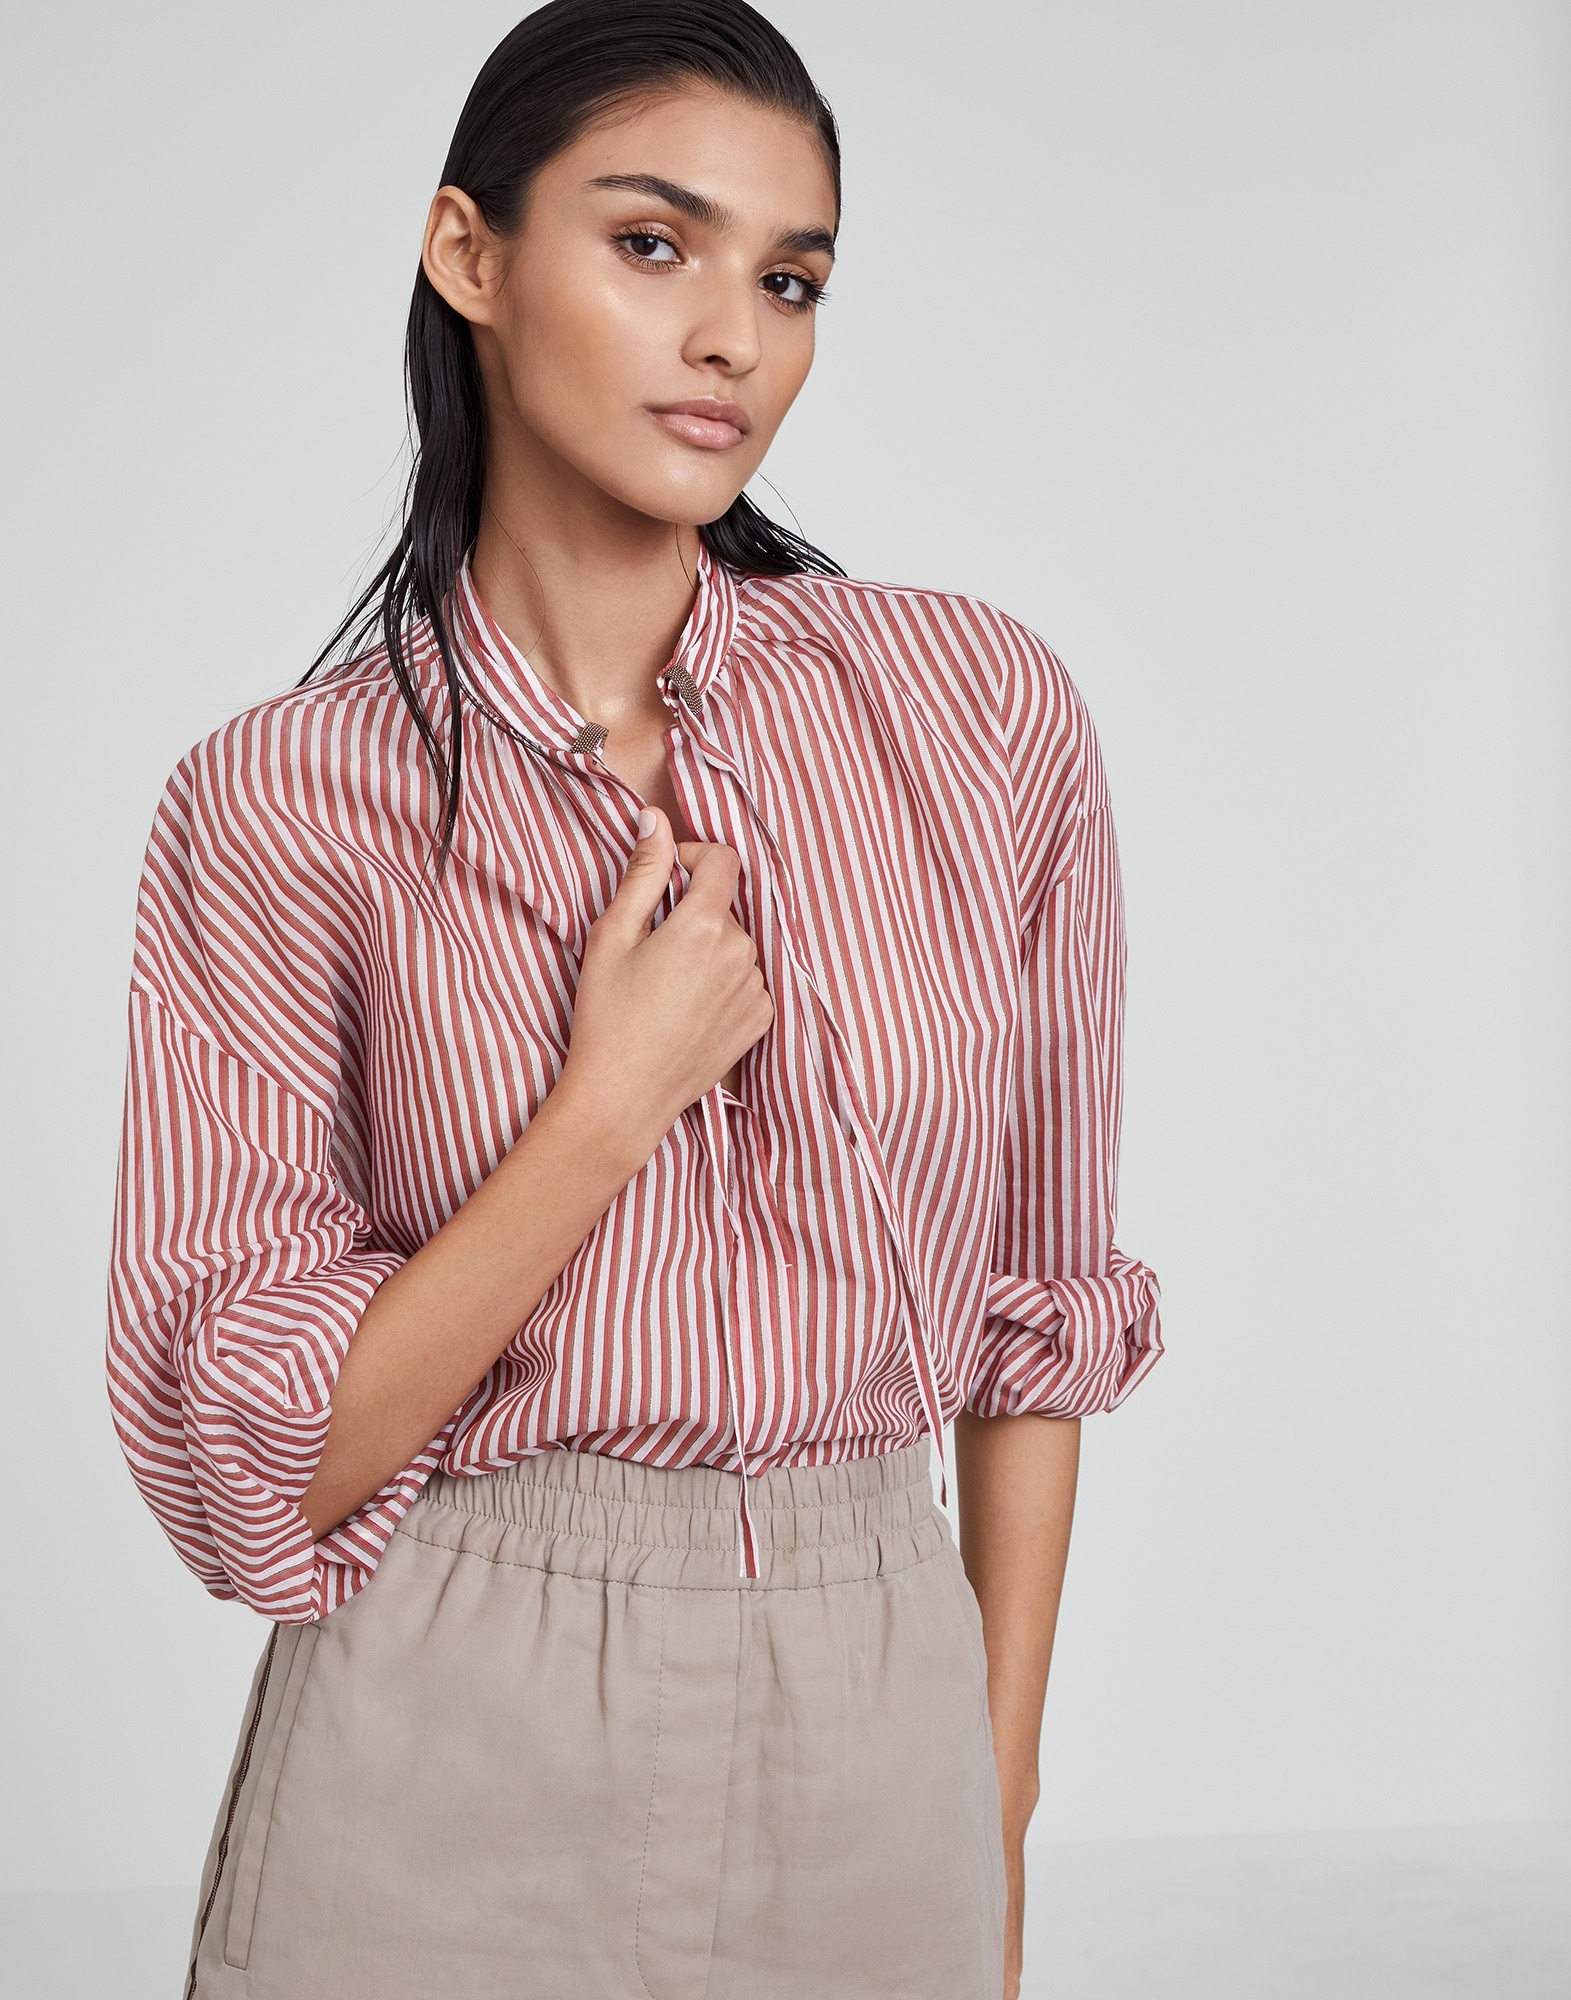 Sparkling cotton and silk striped shirt with shiny details - 4